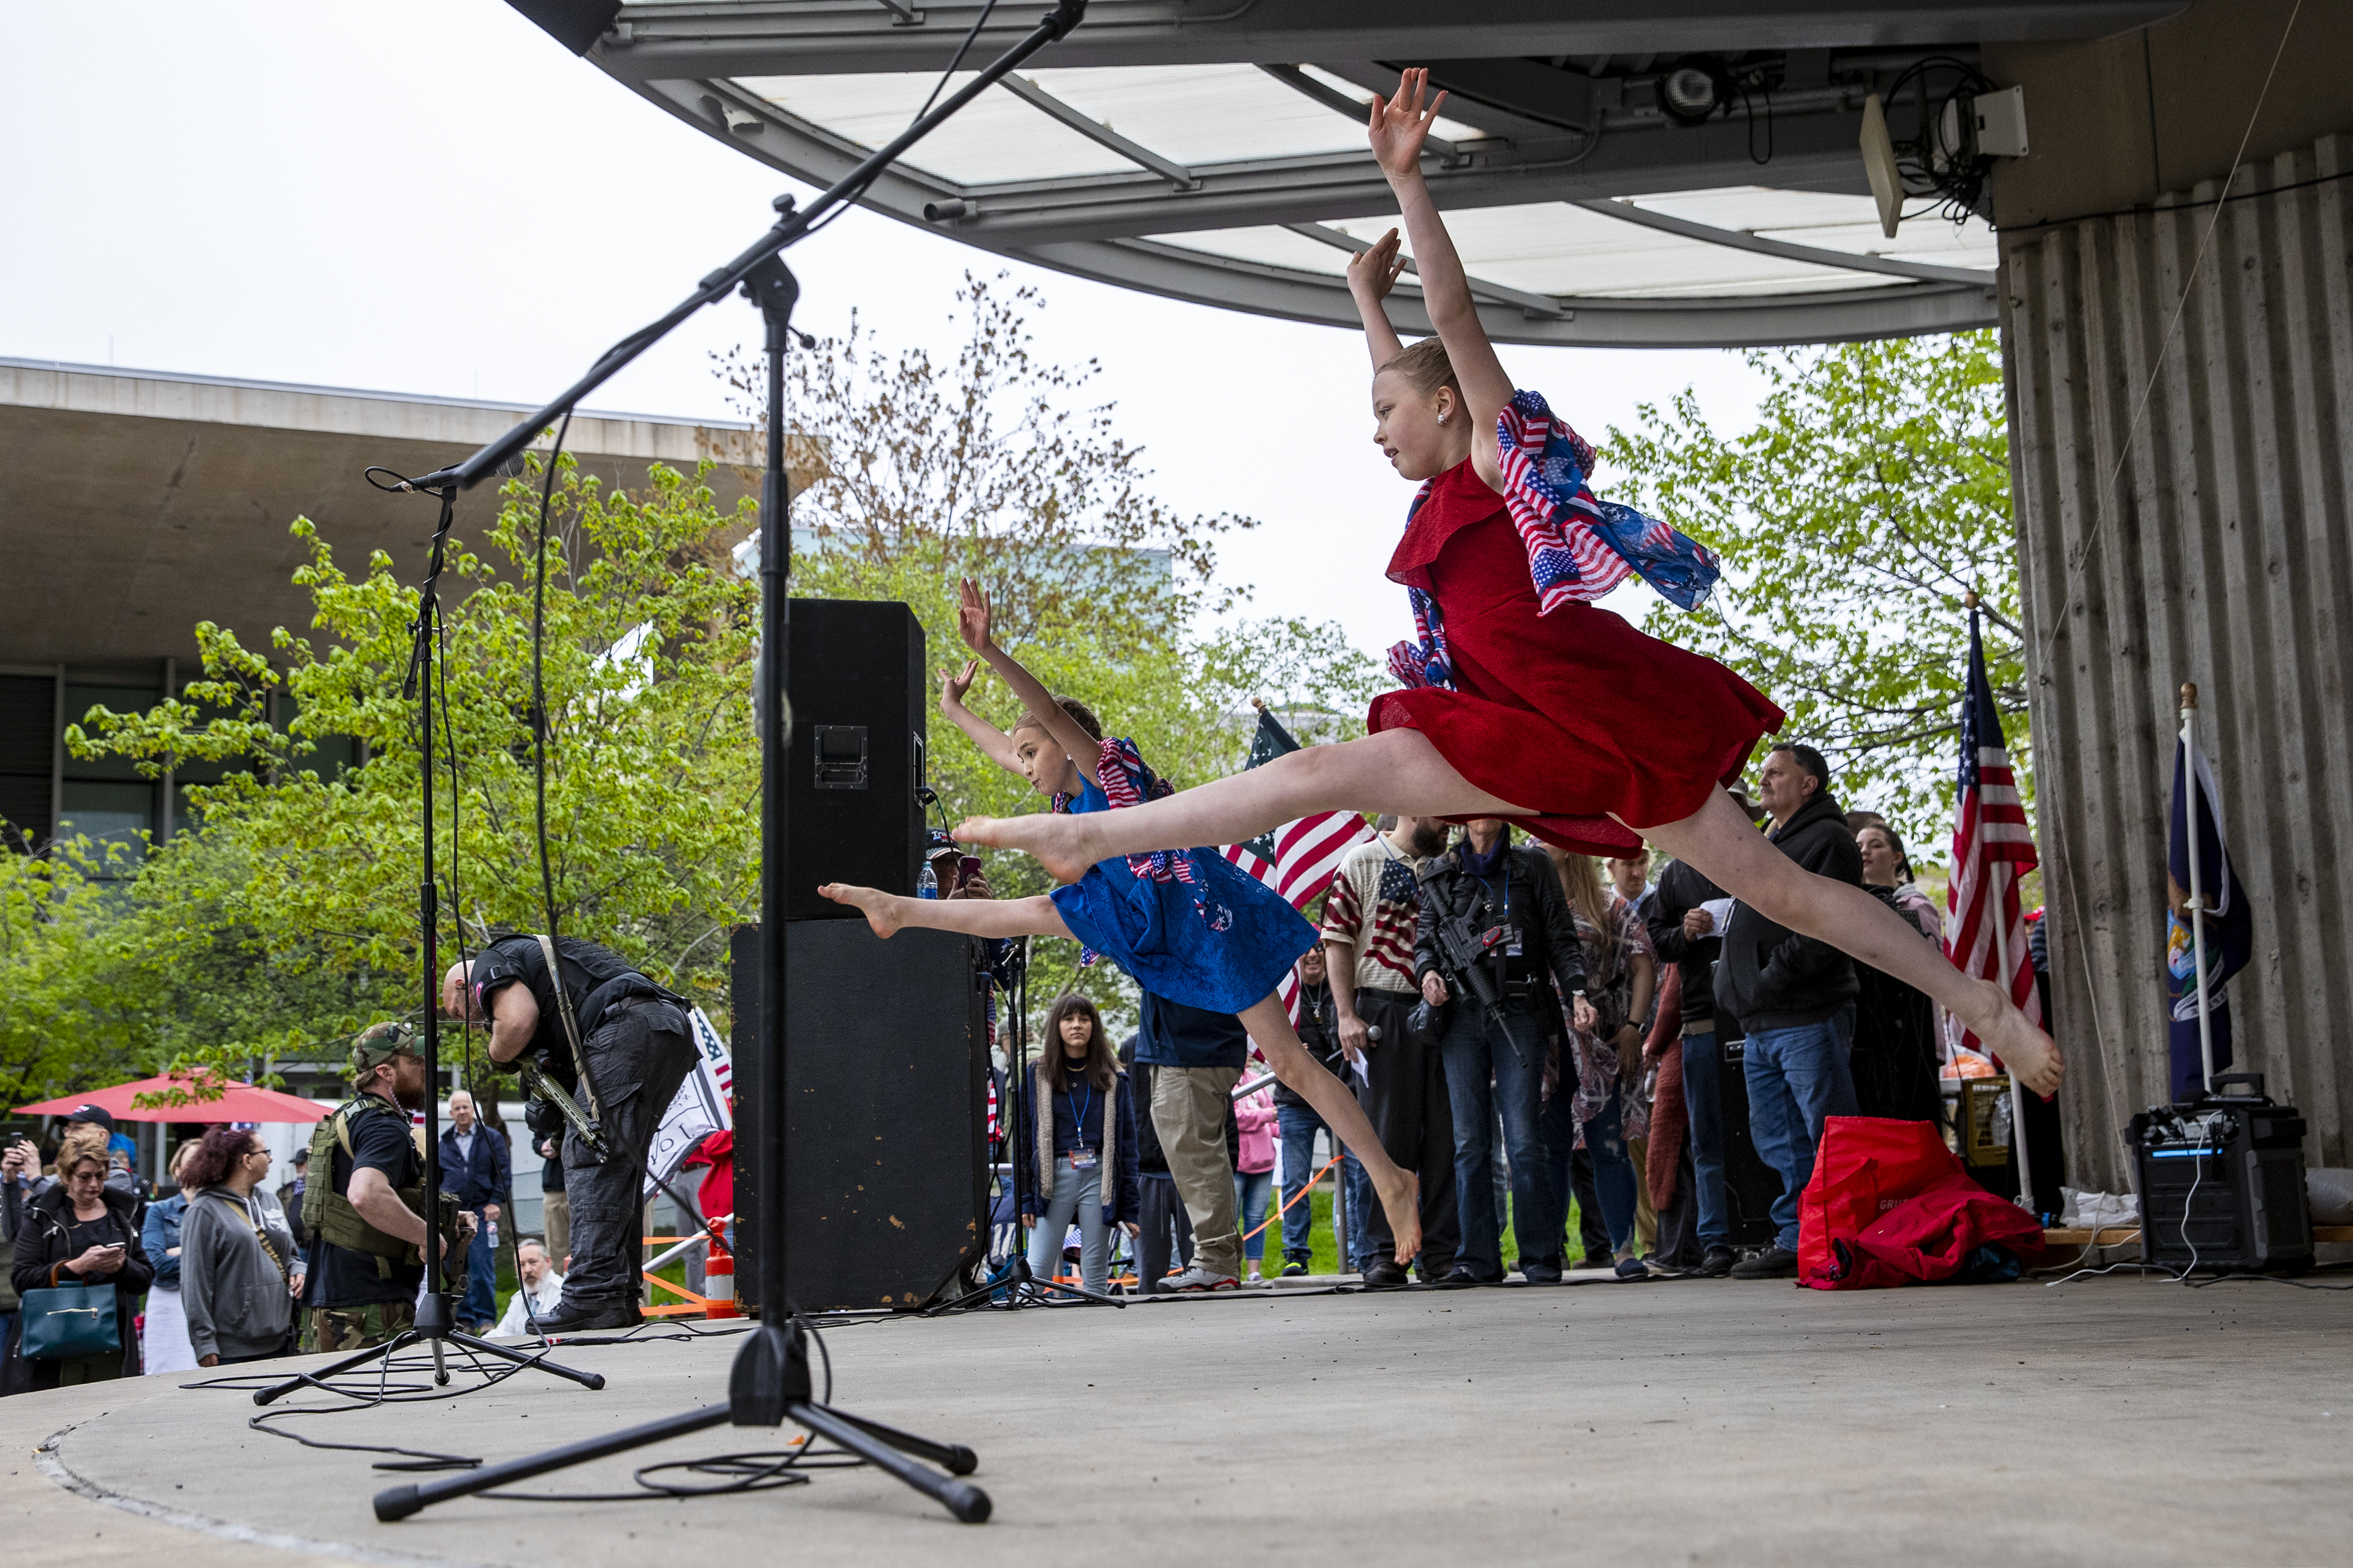 Gracee, 10, left, and Hayden Heikkila, 13, perform a dance routine they developed to the song "We Bleed The Same Color" by Mandisa, featuring TobyMac and Kirk Franklin, during the "American Patriot Rally-Sheriffs speak out" event at Rosa Parks Circle in downtown Grand Rapids on Monday, May 18, 2020. The crowd is protesting against Gov. Gretchen Whitmer's stay-at-home order. The sisters are from Battle Creek. (Cory Morse | MLive.com)